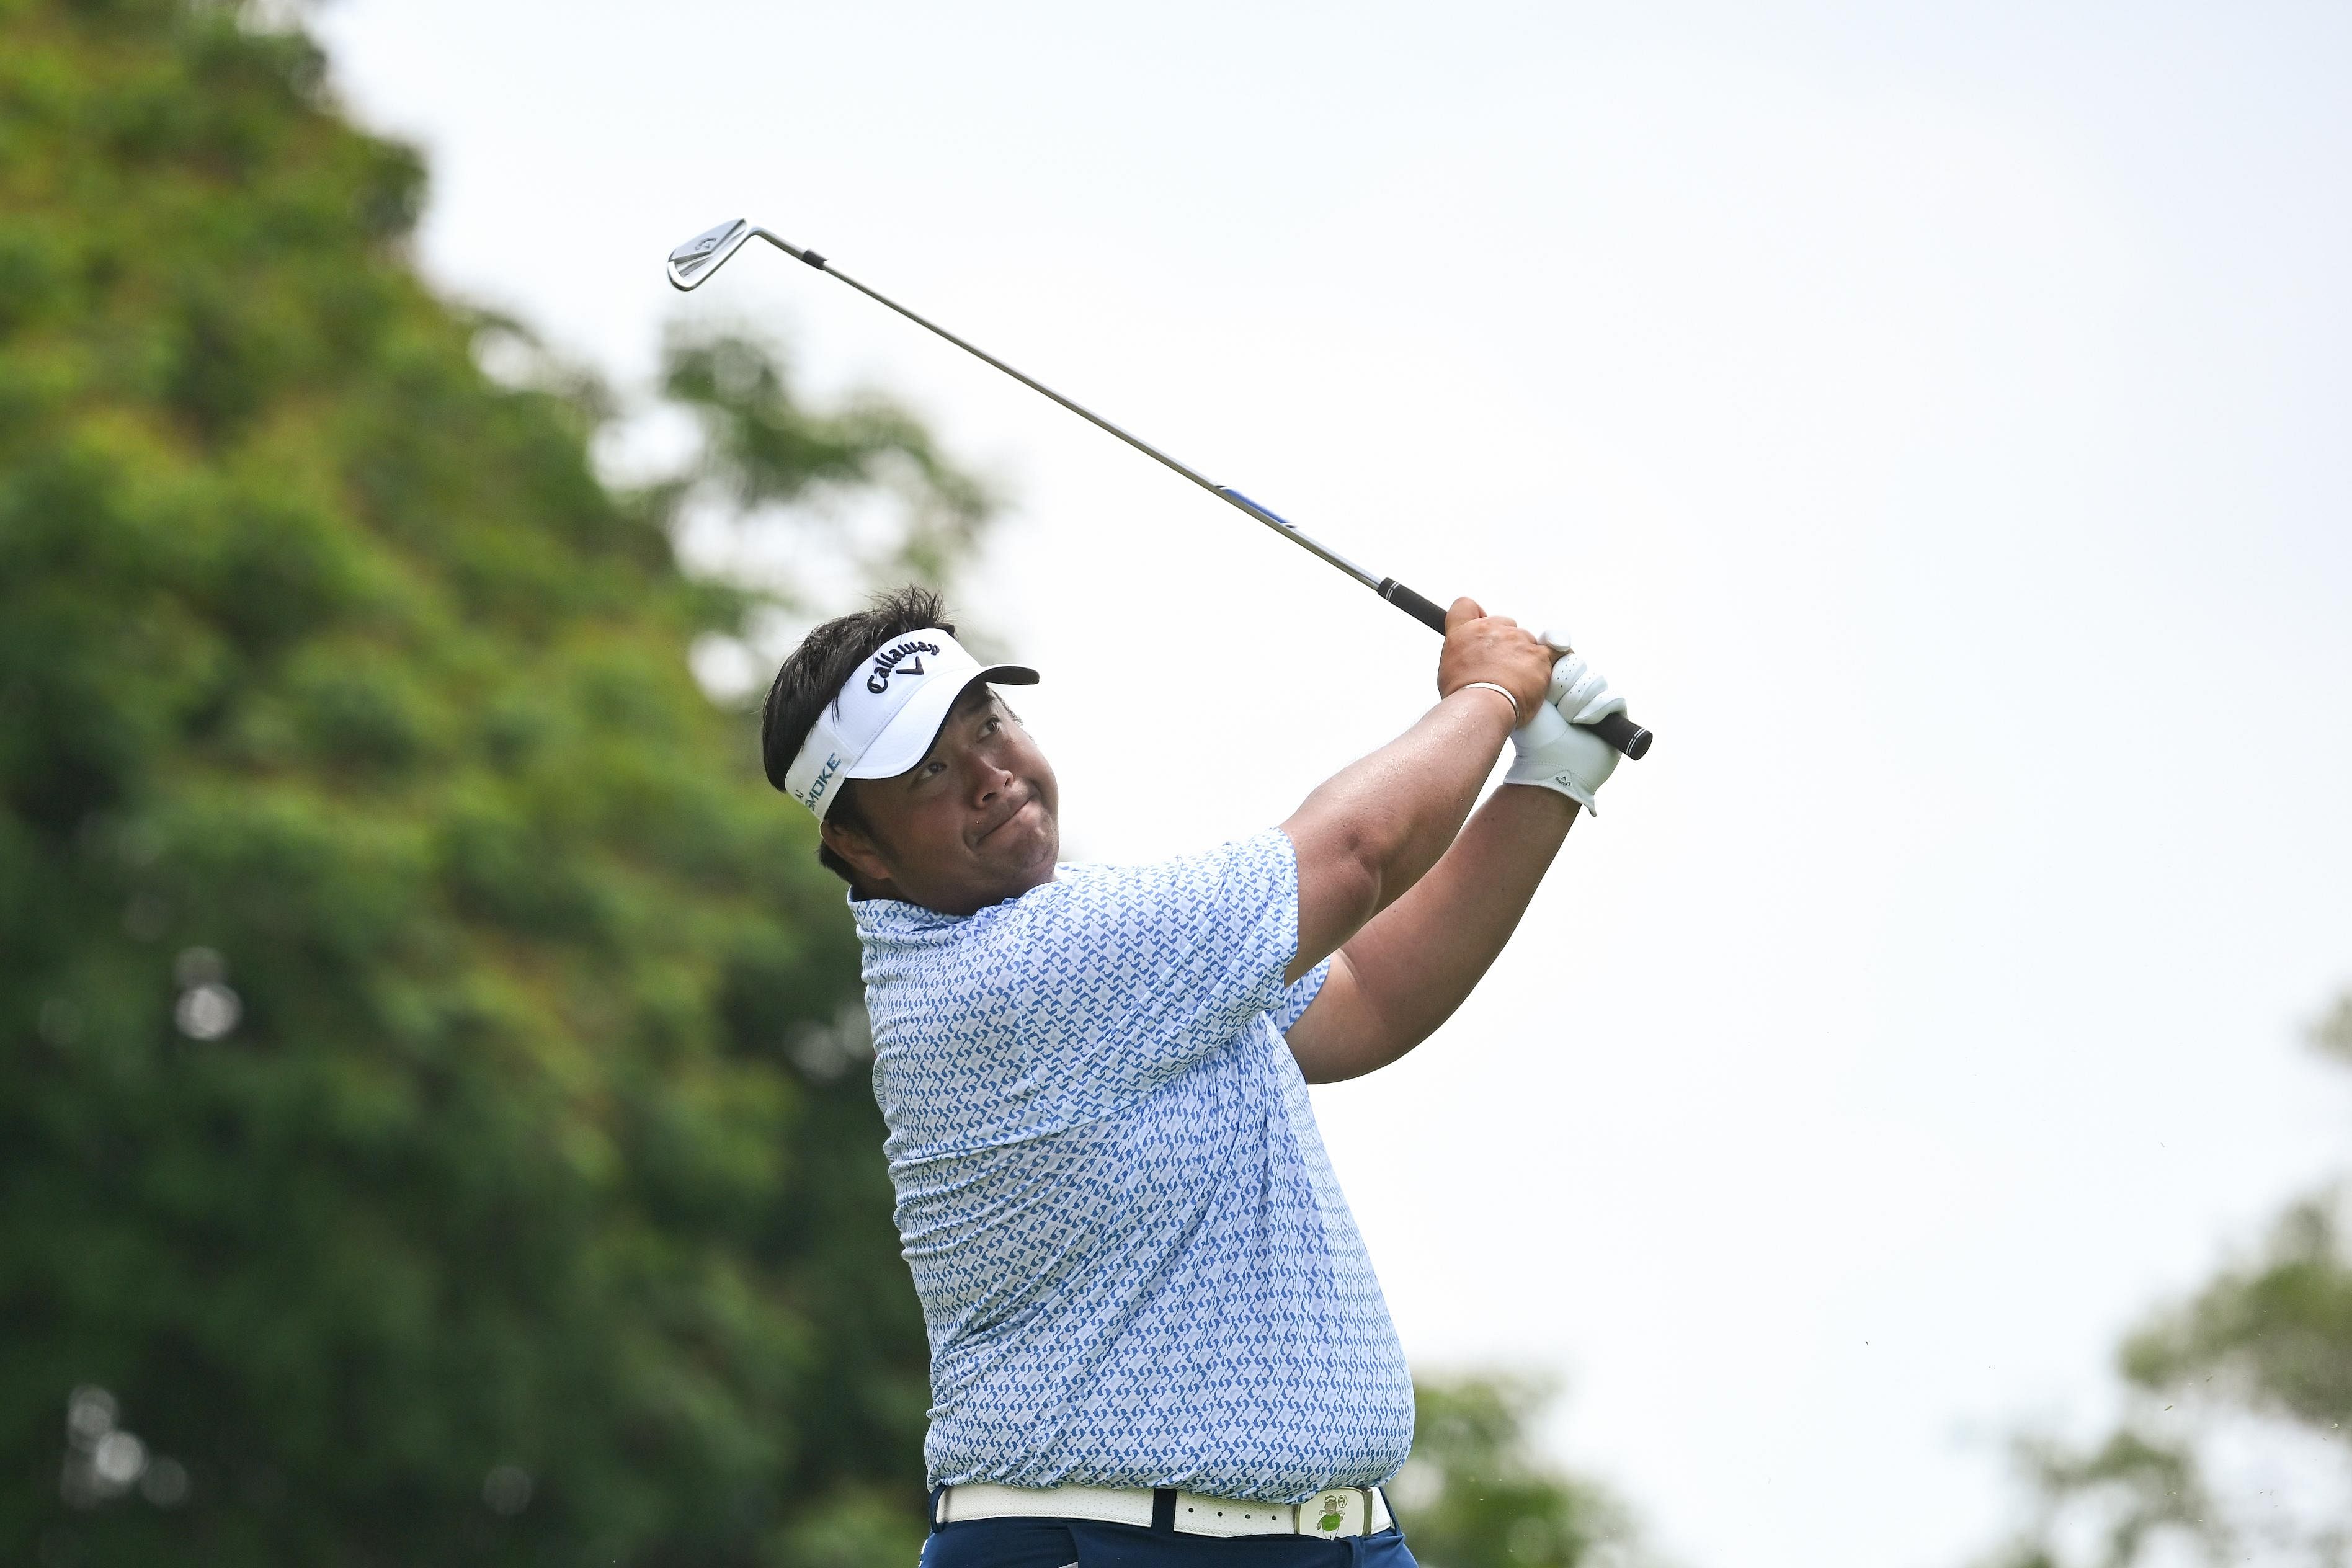 Family support helps Kiradech Aphibarnrat take joint lead after first round of Porsche Singapore Classic